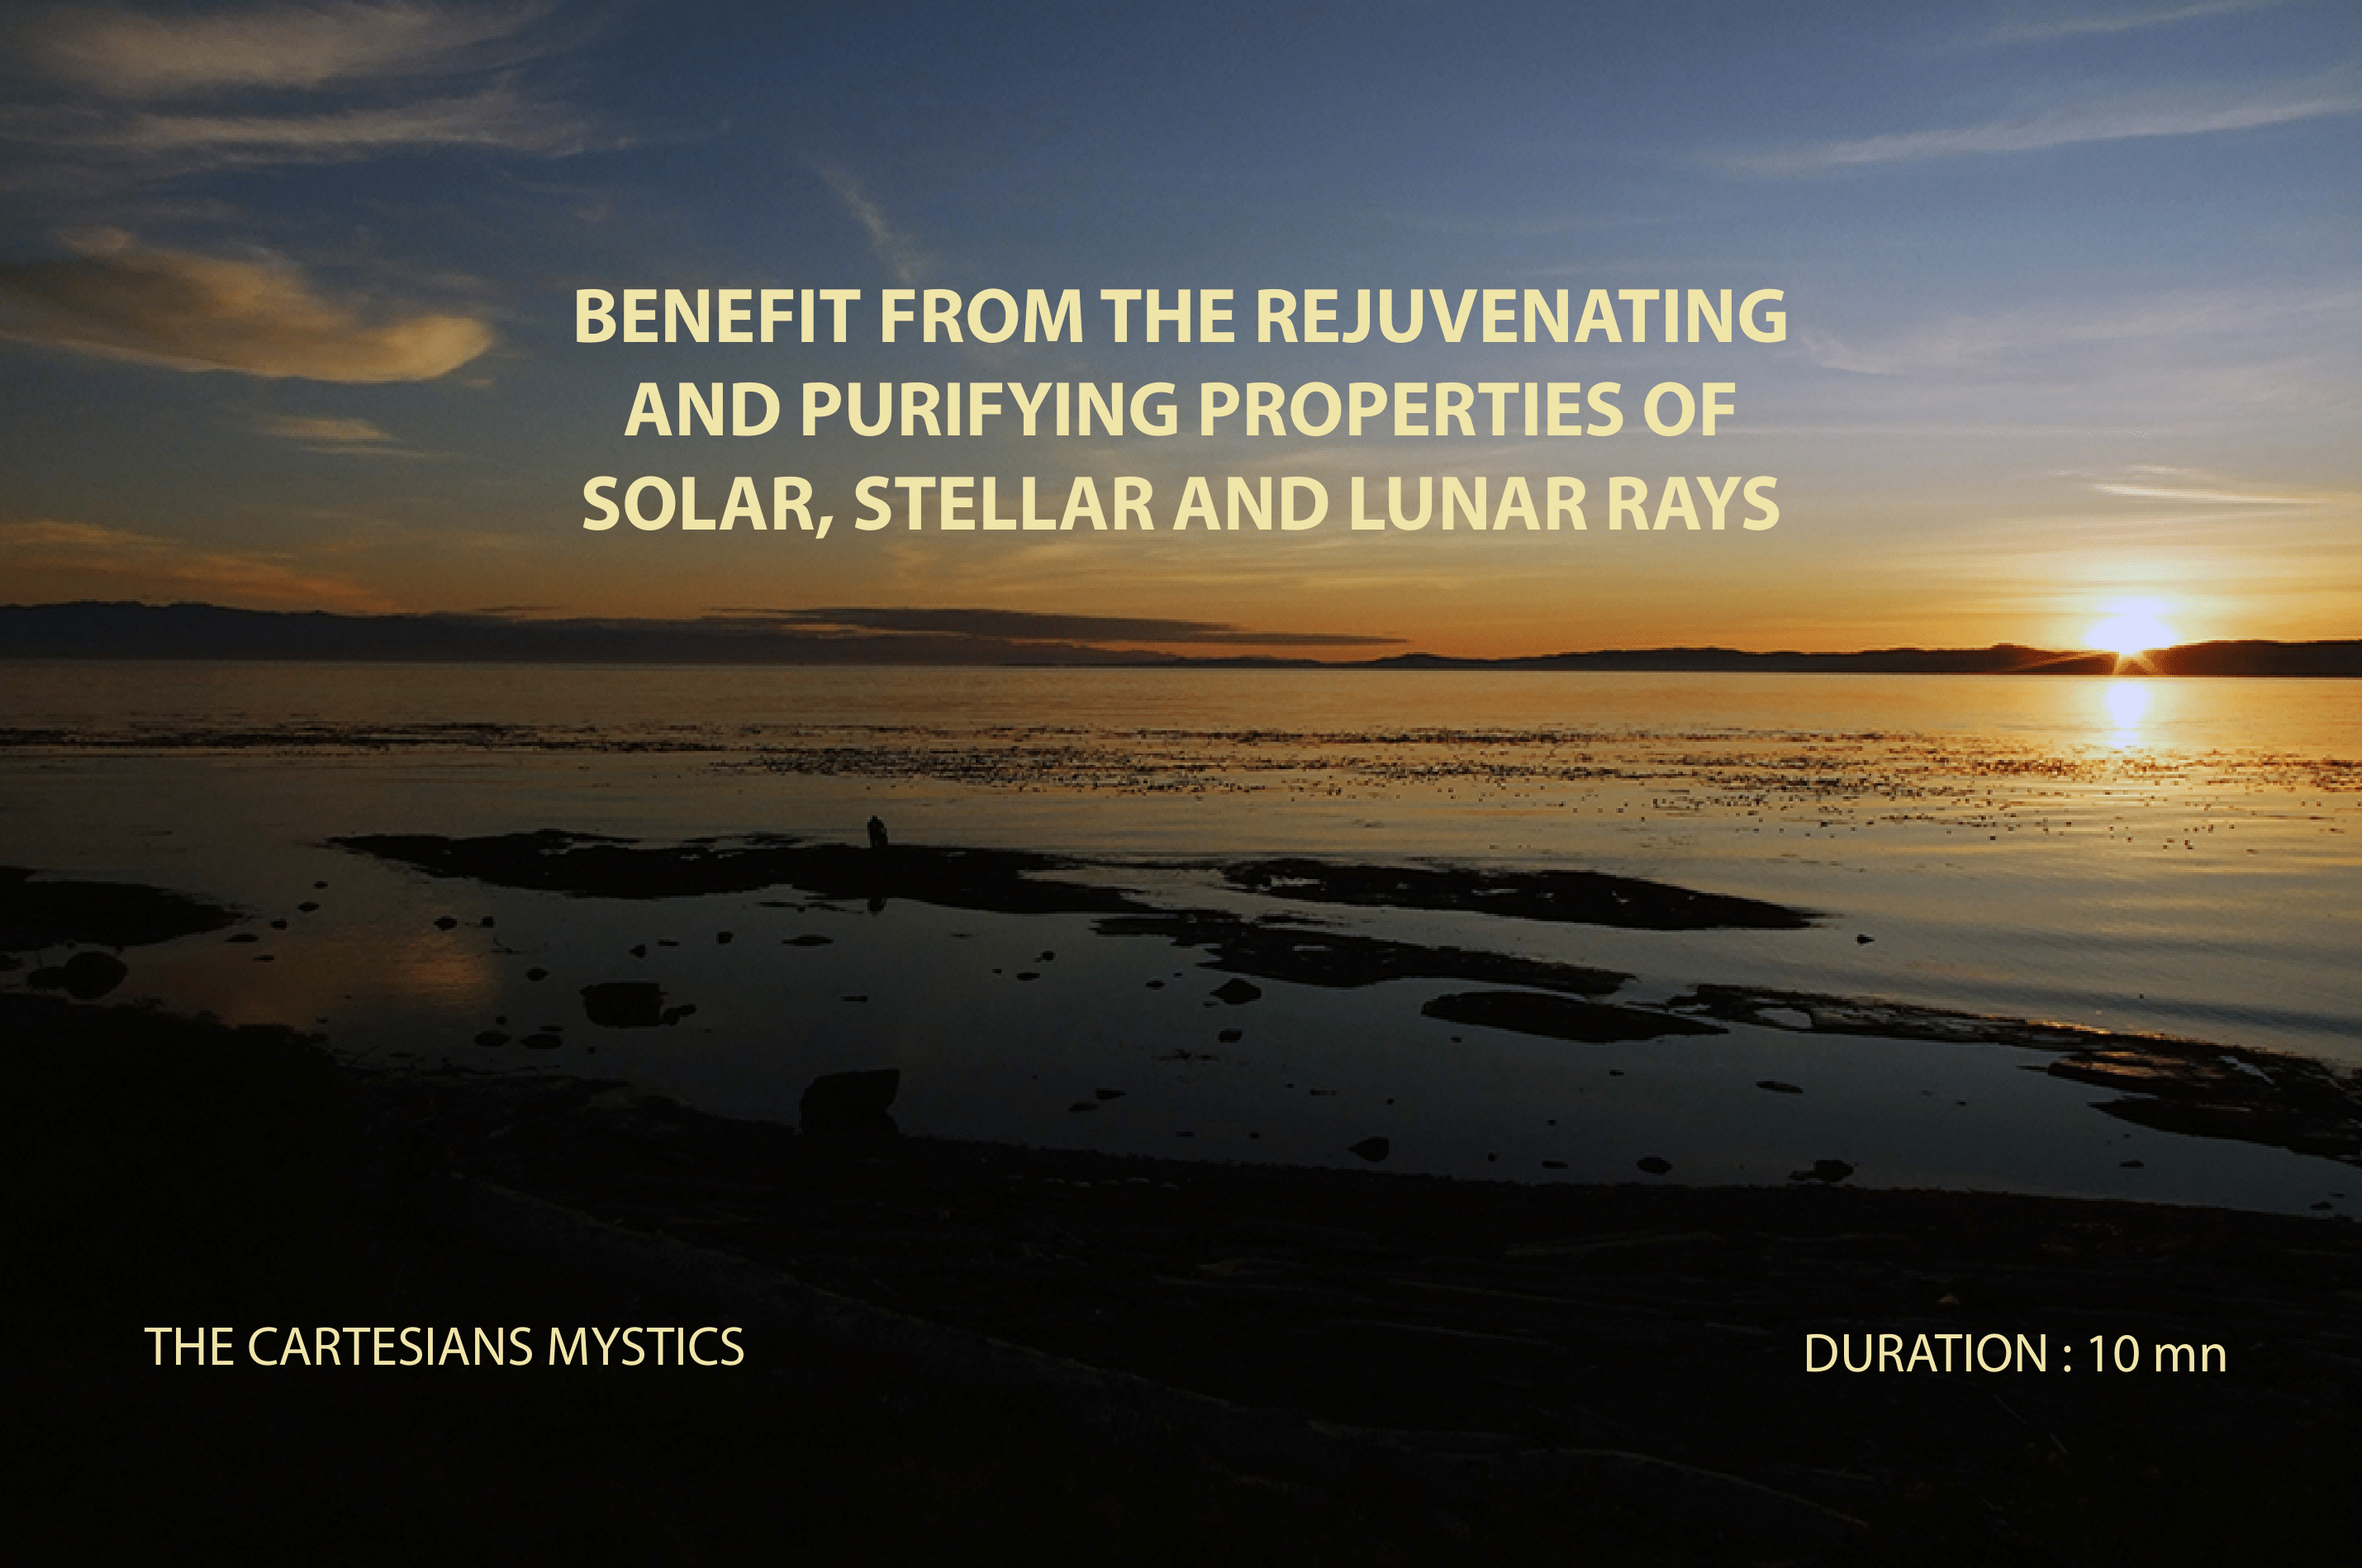 MEDITATION N ° 15: BENEFIT FROM THE REJUVENATING AND PURIFYING PROPERTIES OF SOLAR, STELLAR AND LUNAR RAYS